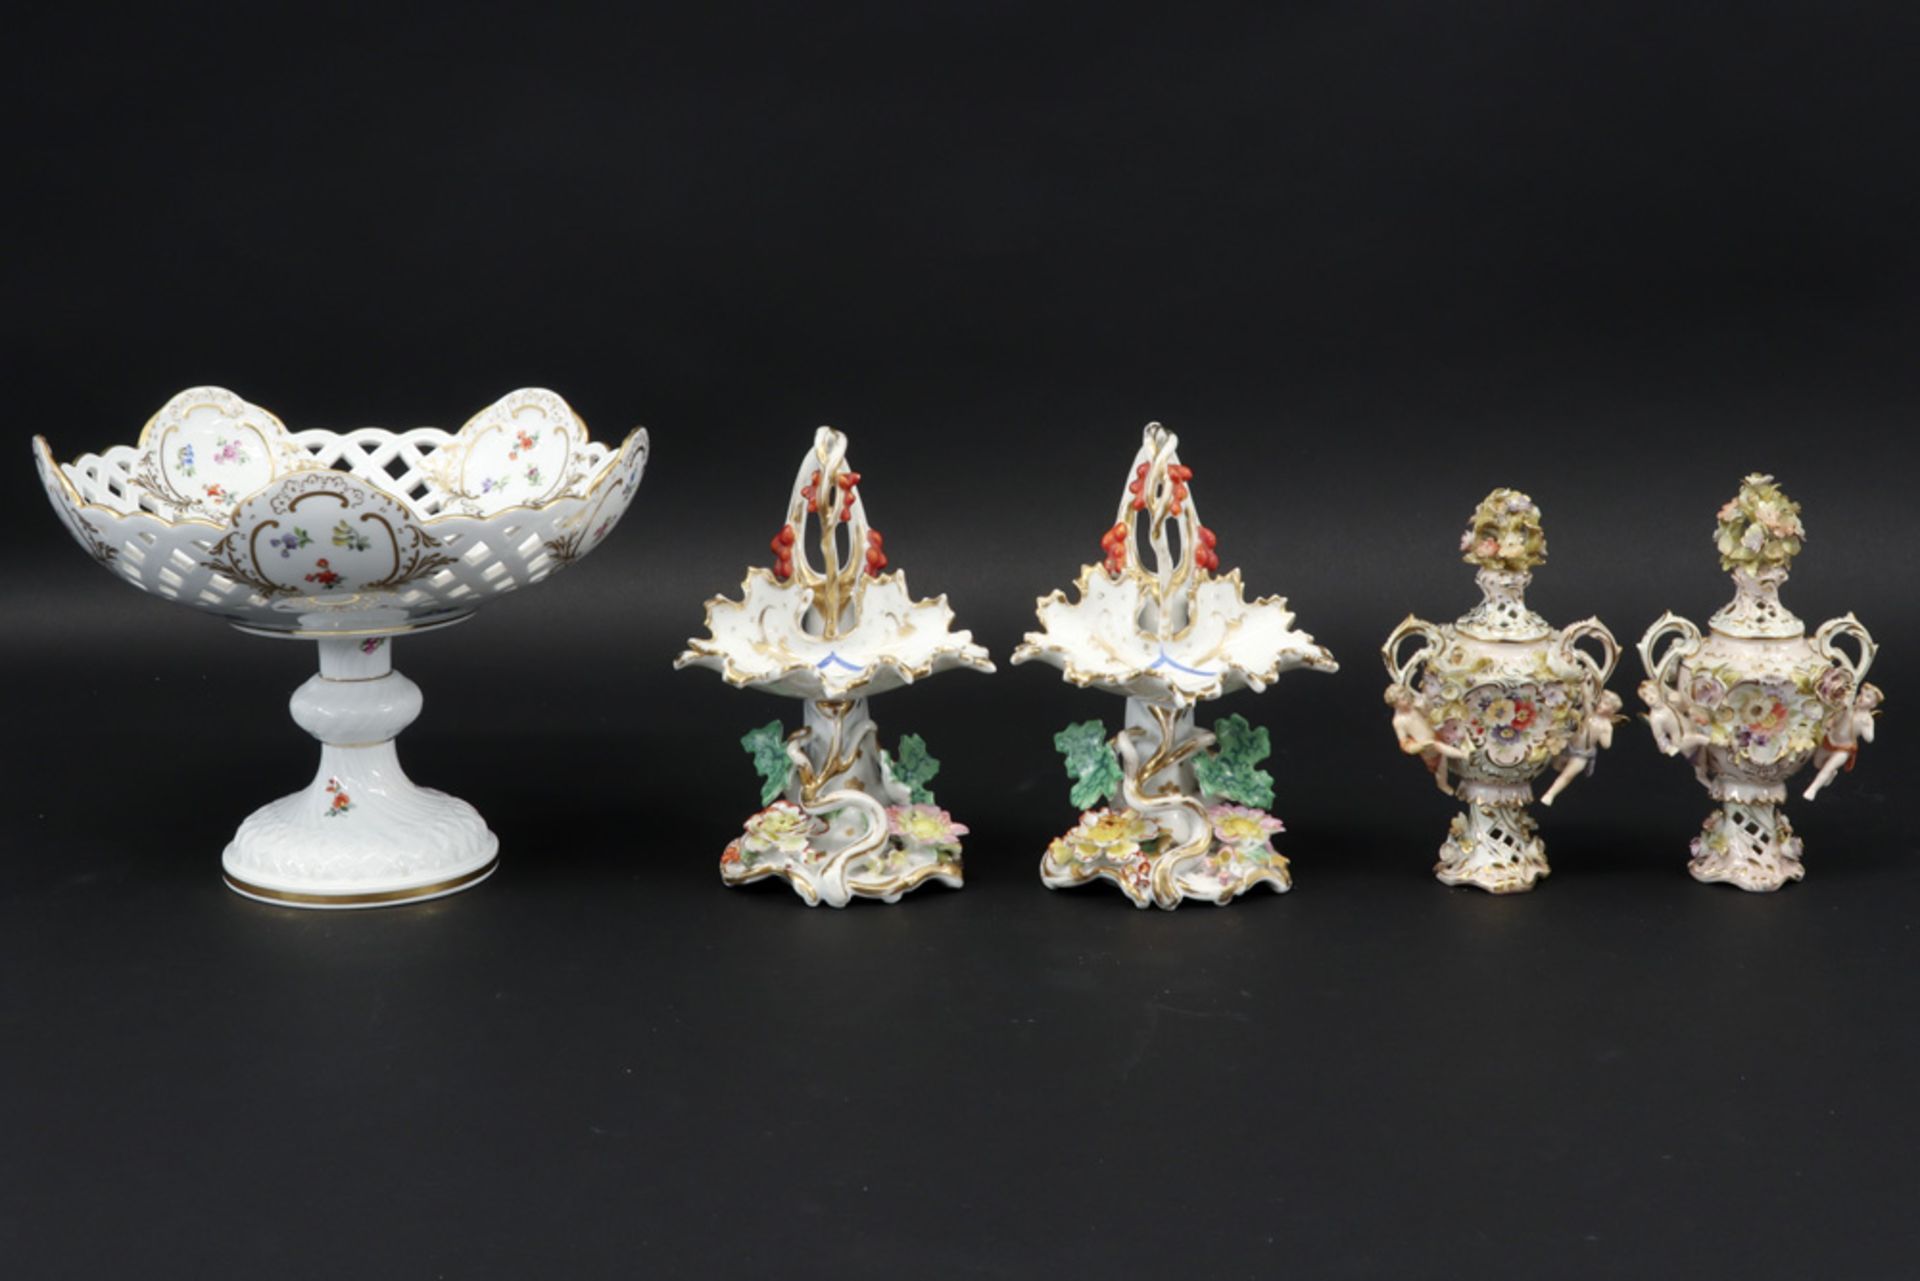 lot with old and antique porcelain amongst which a pair of 19th Cent. salt cellars, a Meissen marked